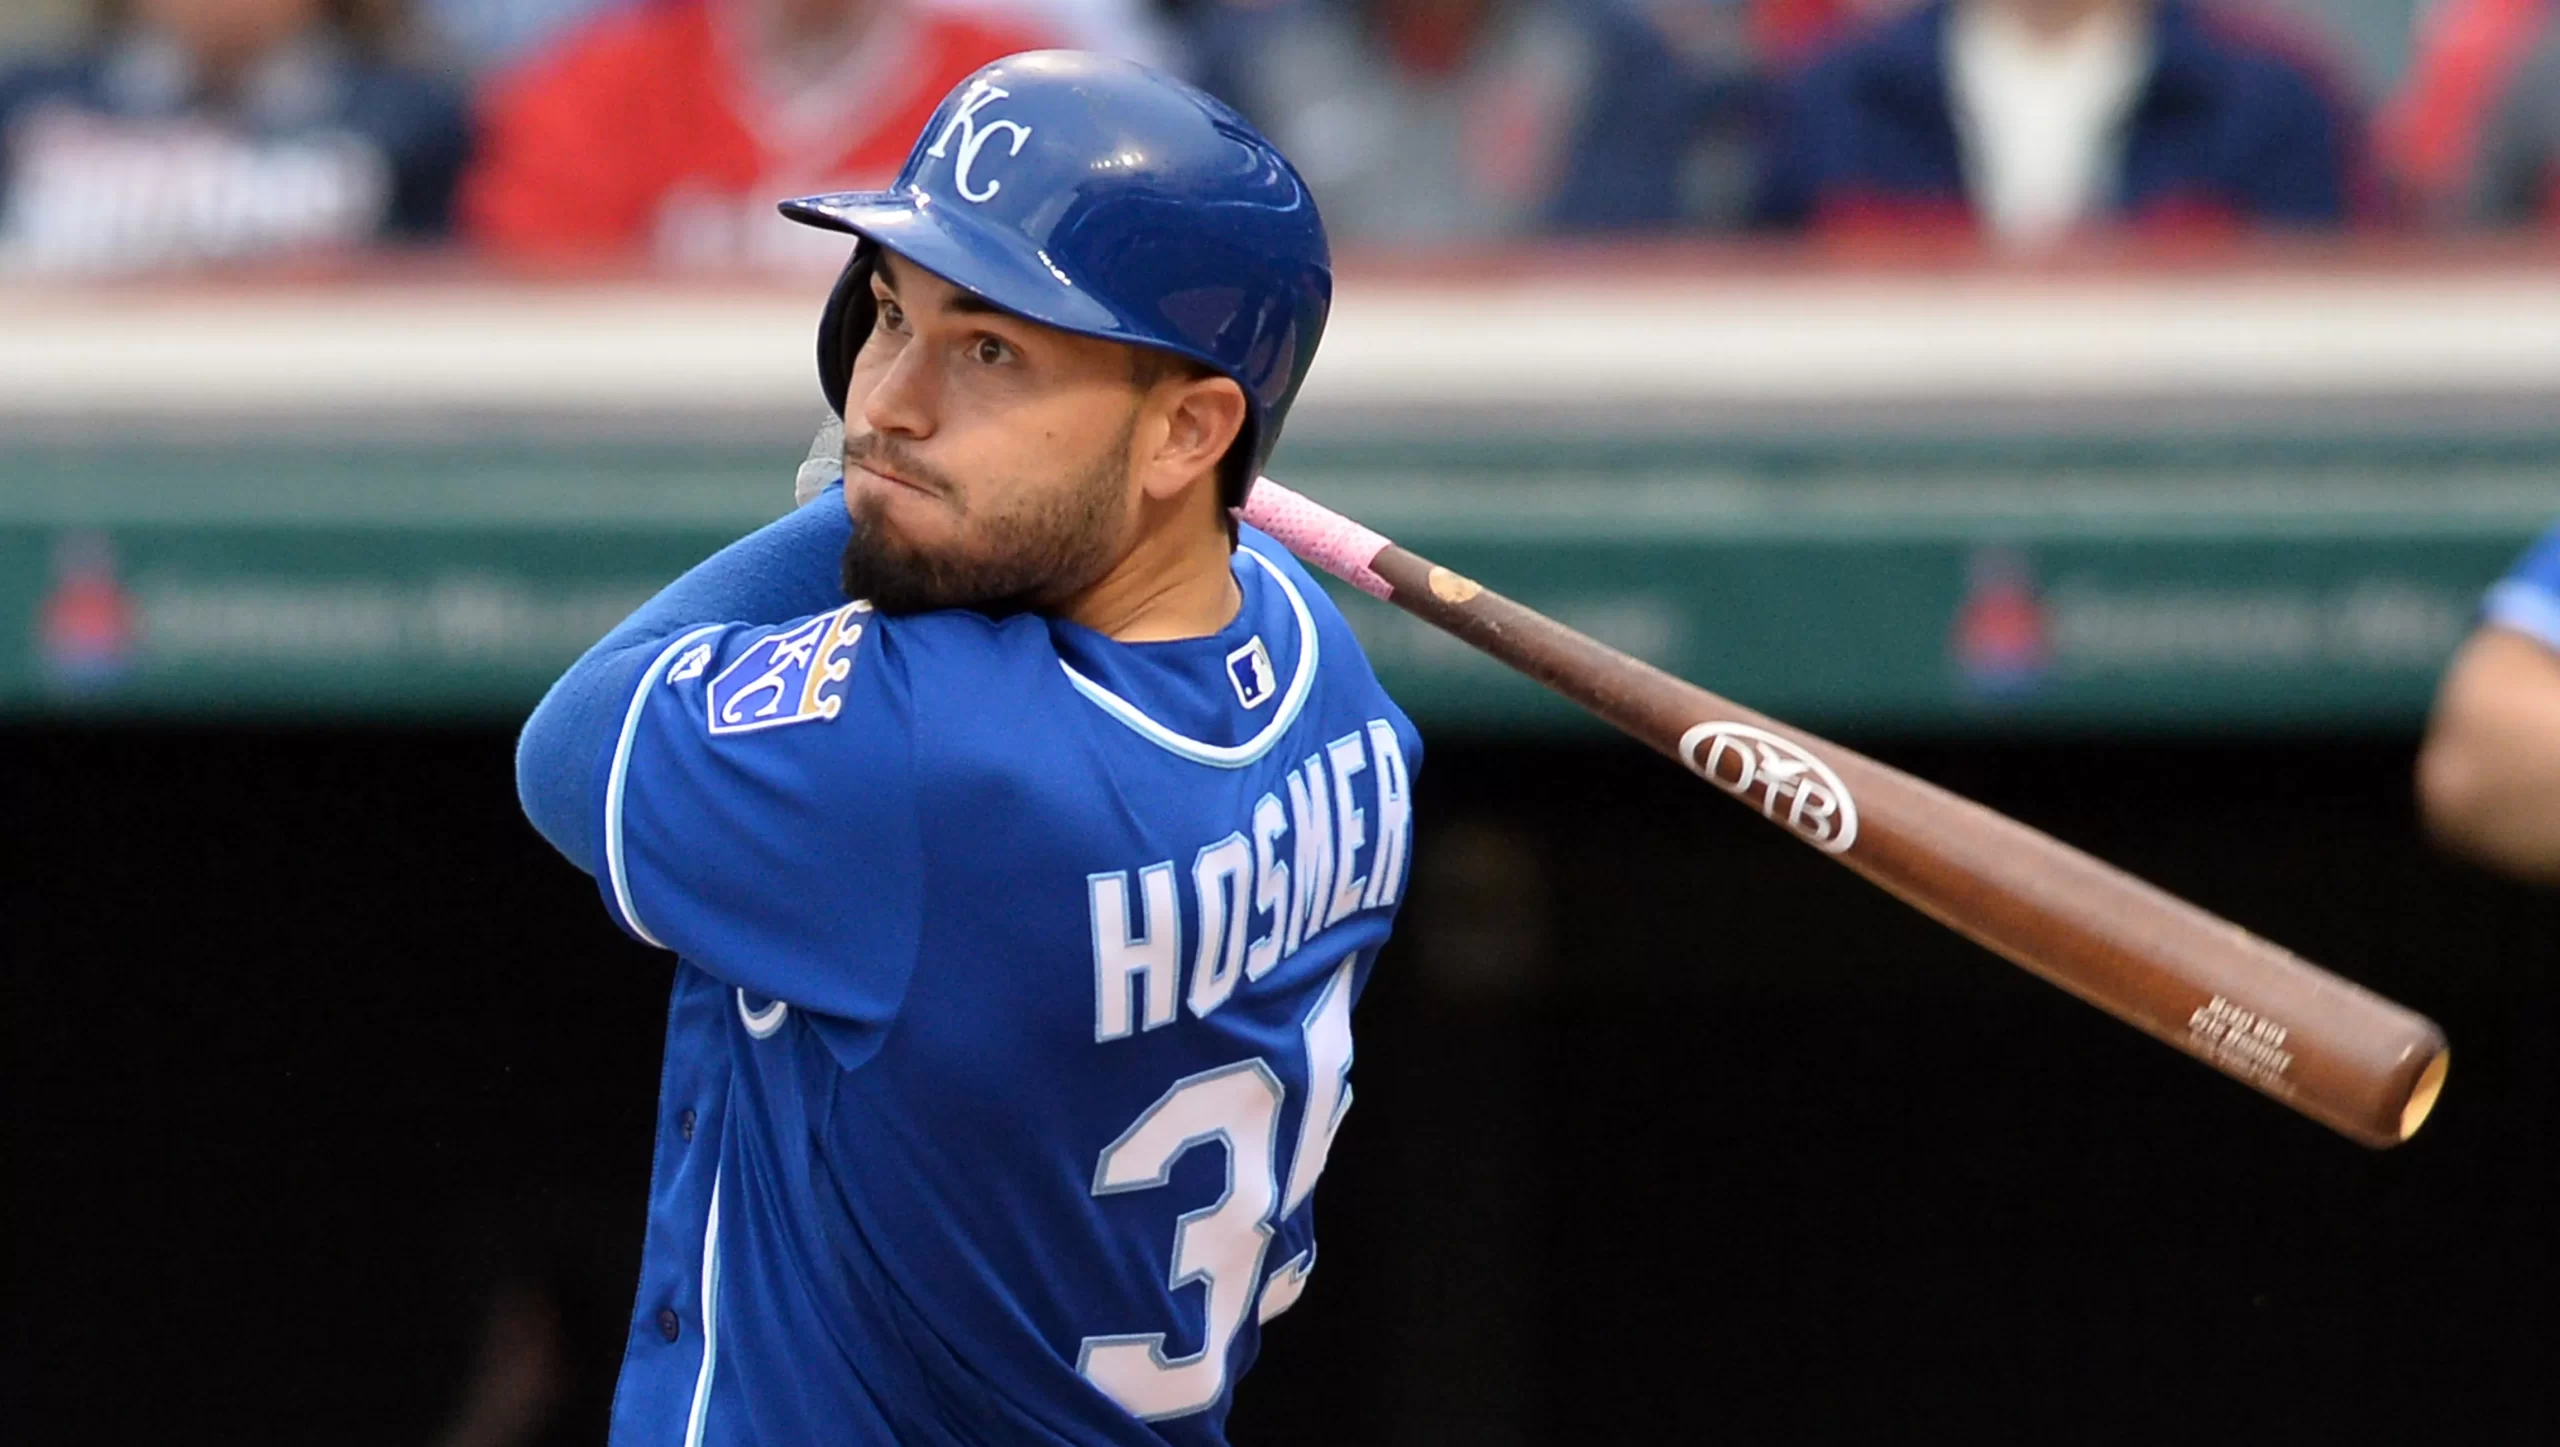 Eric Hosmer Retires: The Rise and Fall of a Royals Star